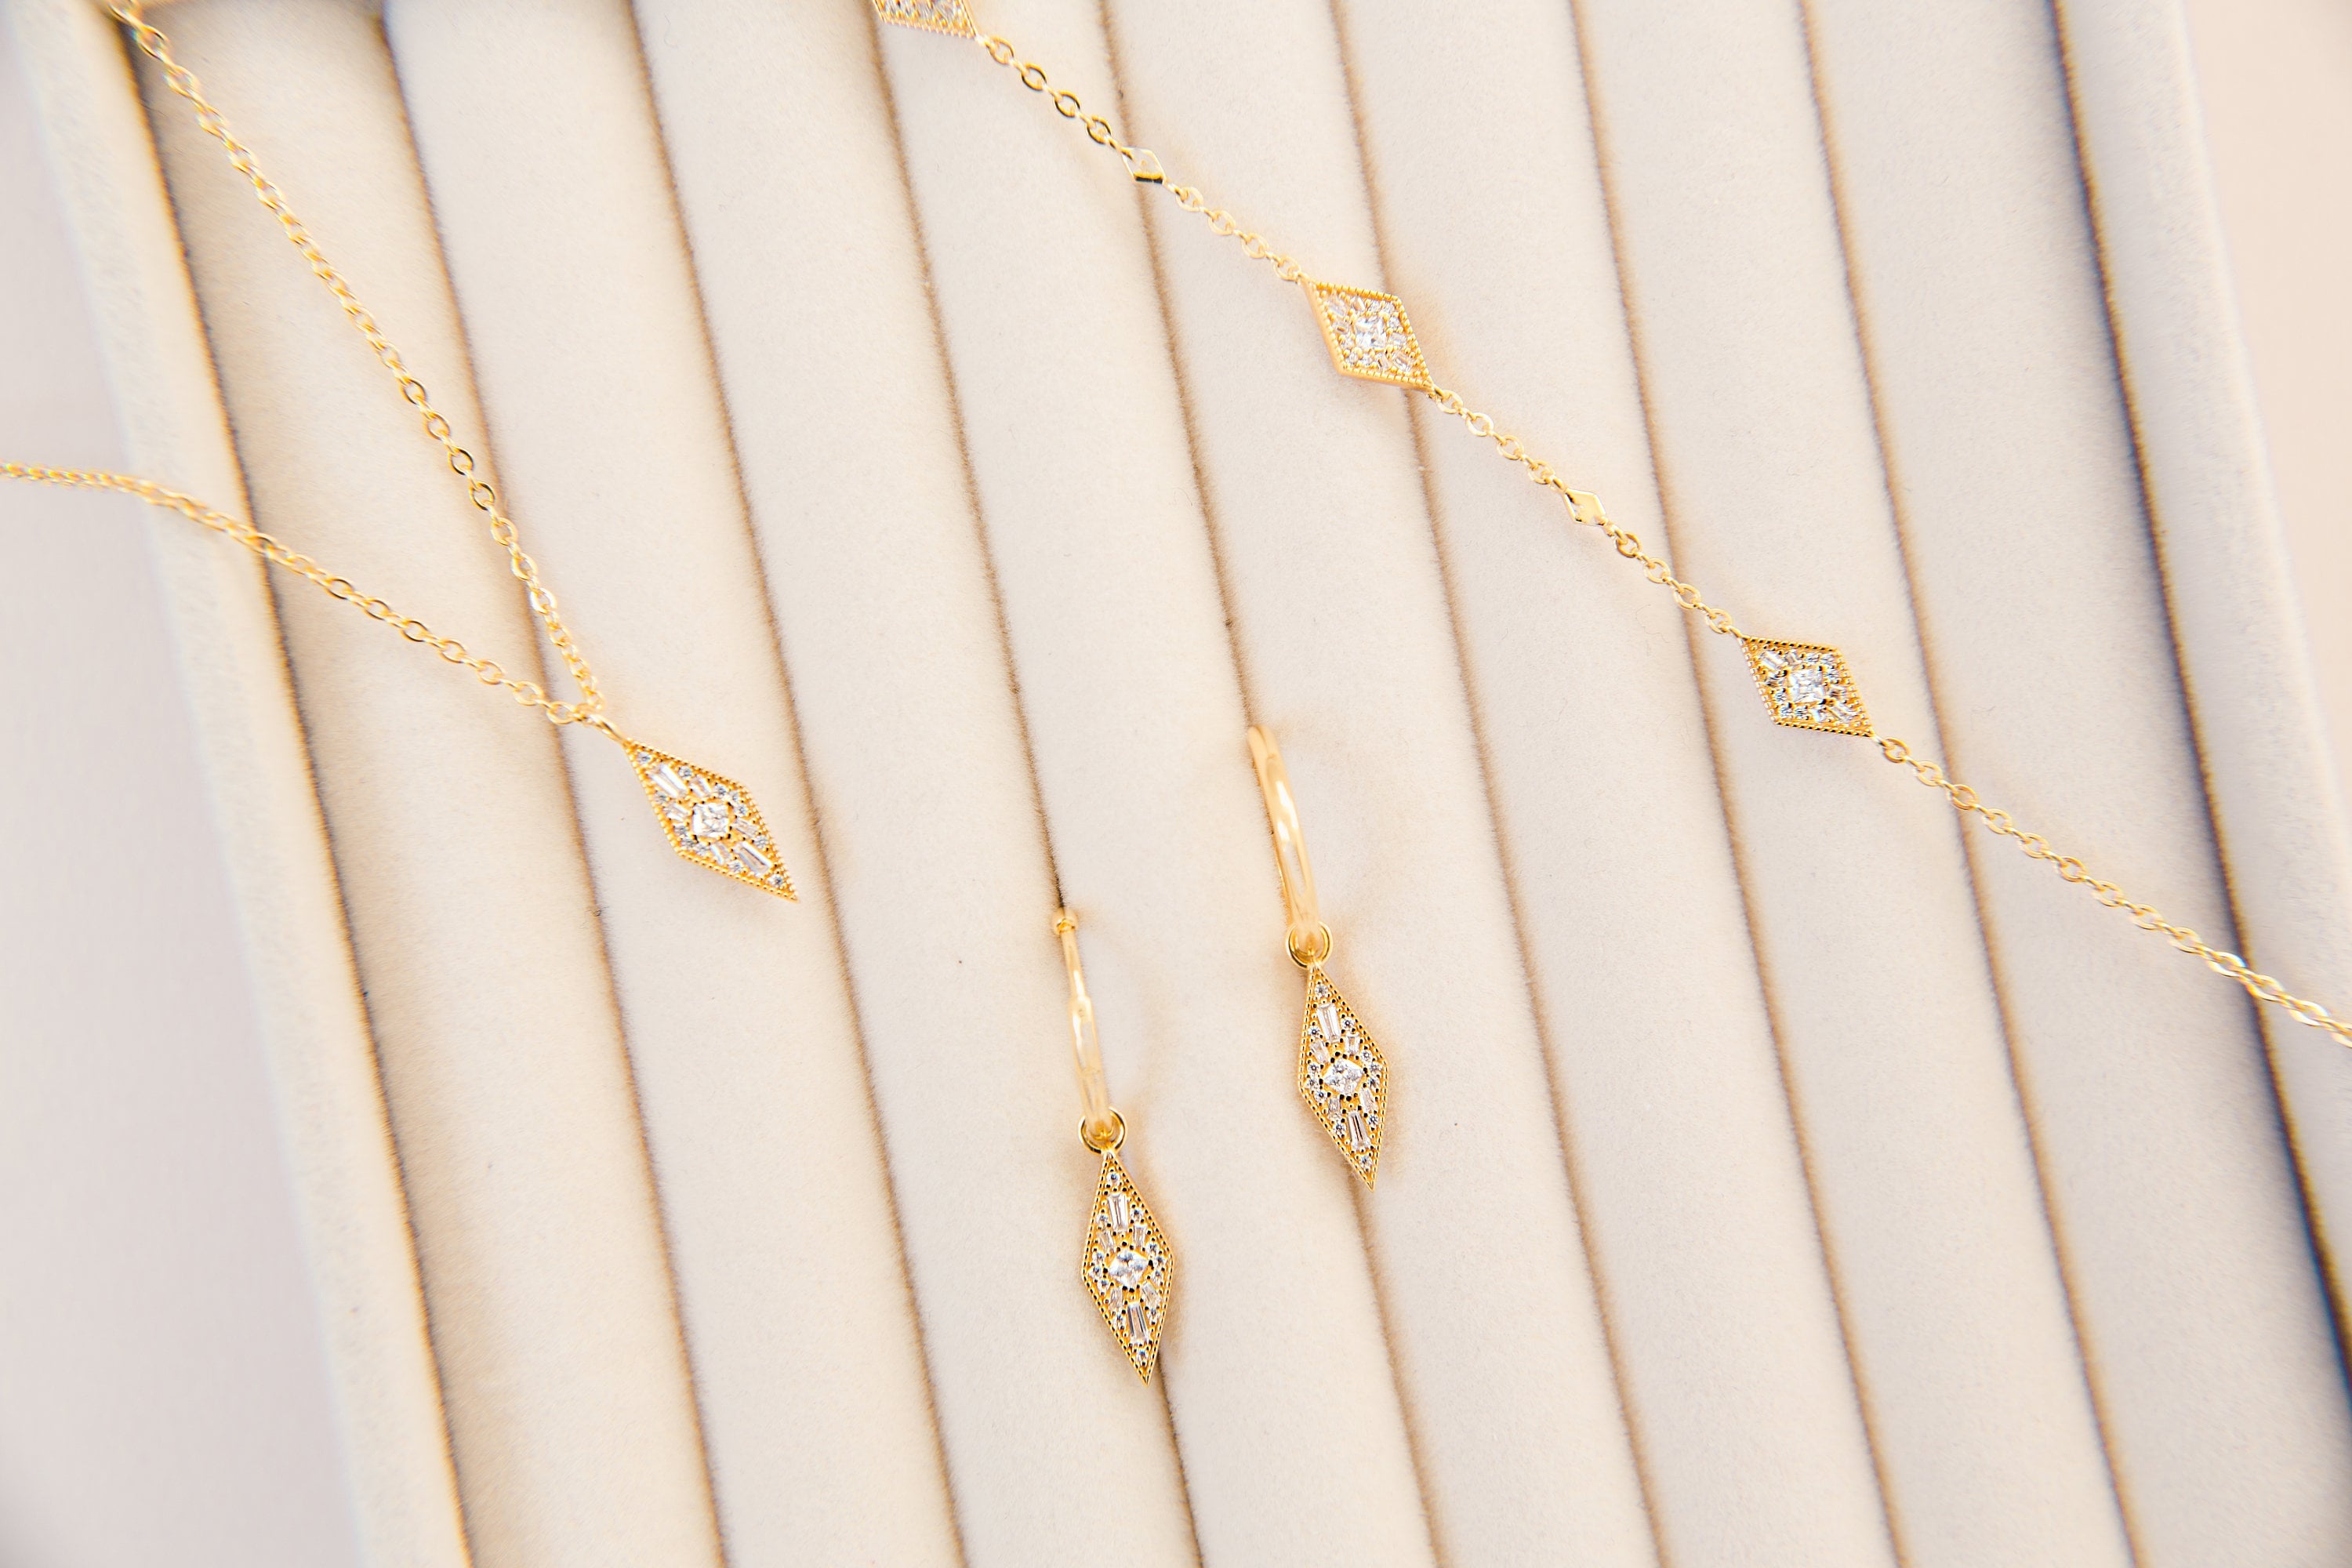 KITE NECKLACE // Dainty 14k gold plated cubic zirconia charm necklace